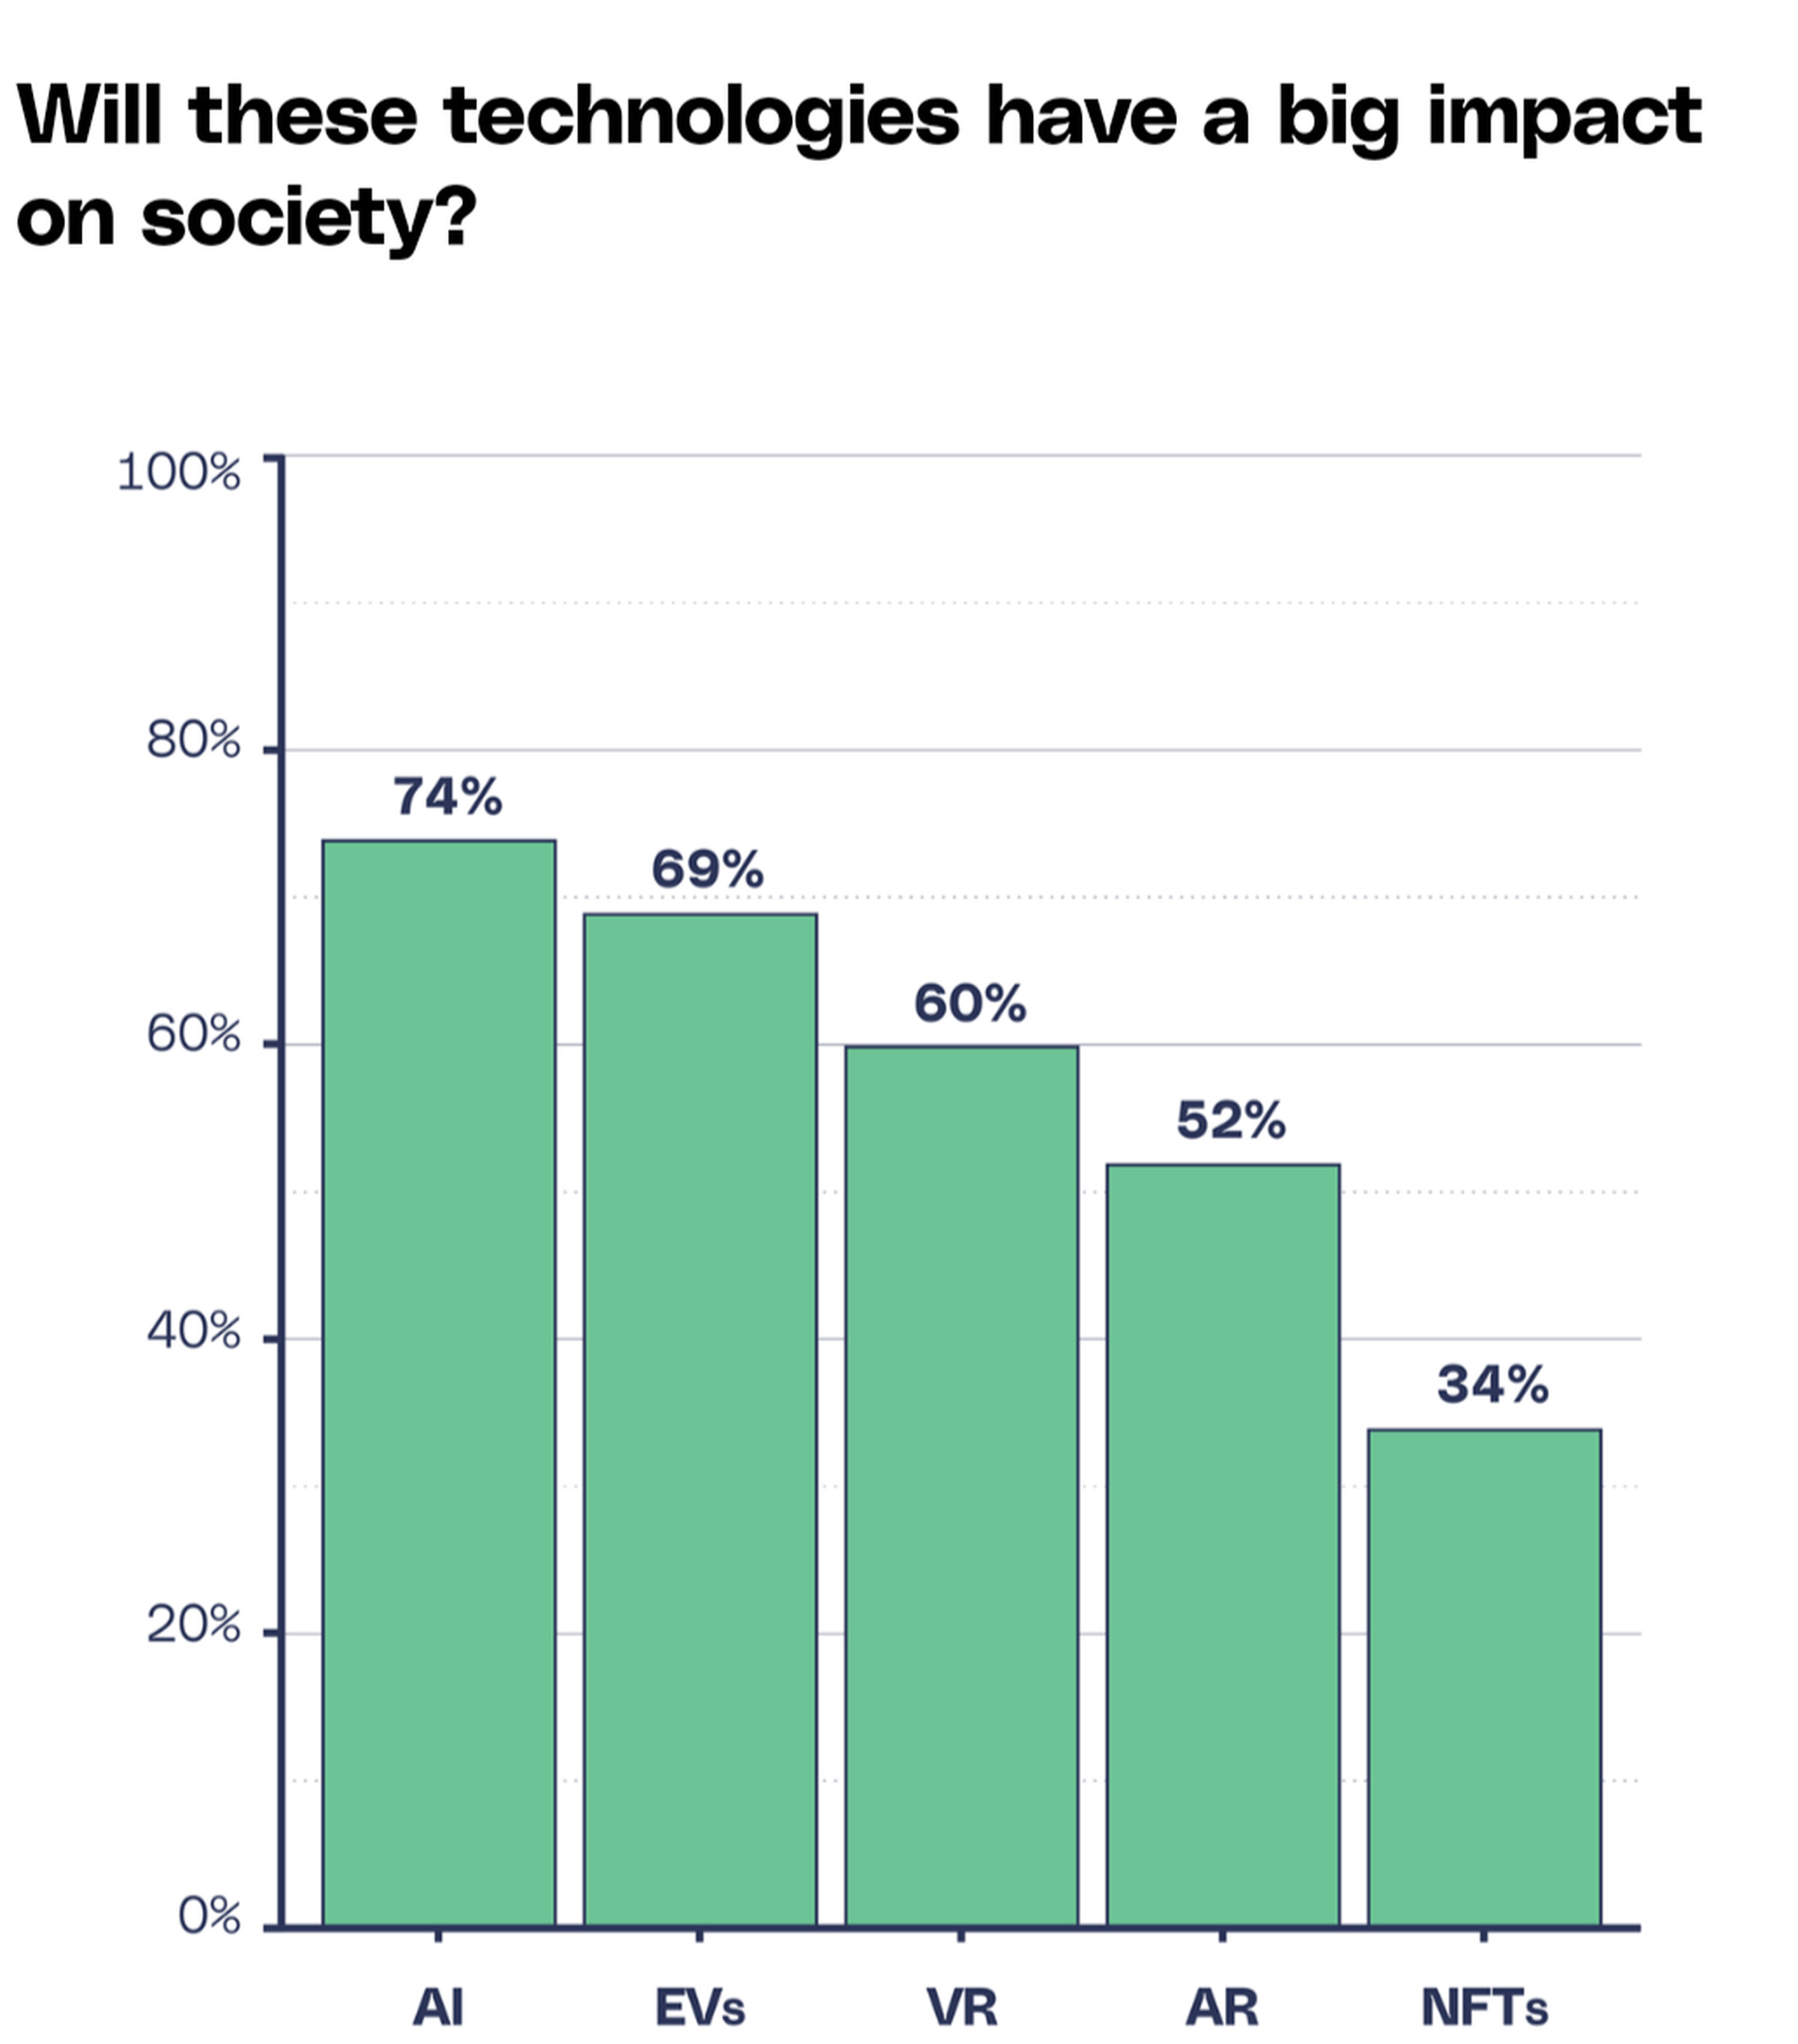 “Nearly three-quarters of people said AI will have a large or moderate impact on society. That’s compared to 69 percent for electric vehicles and a paltry 34 percent for NFTs. They’re&nbsp;so&nbsp;2021.”